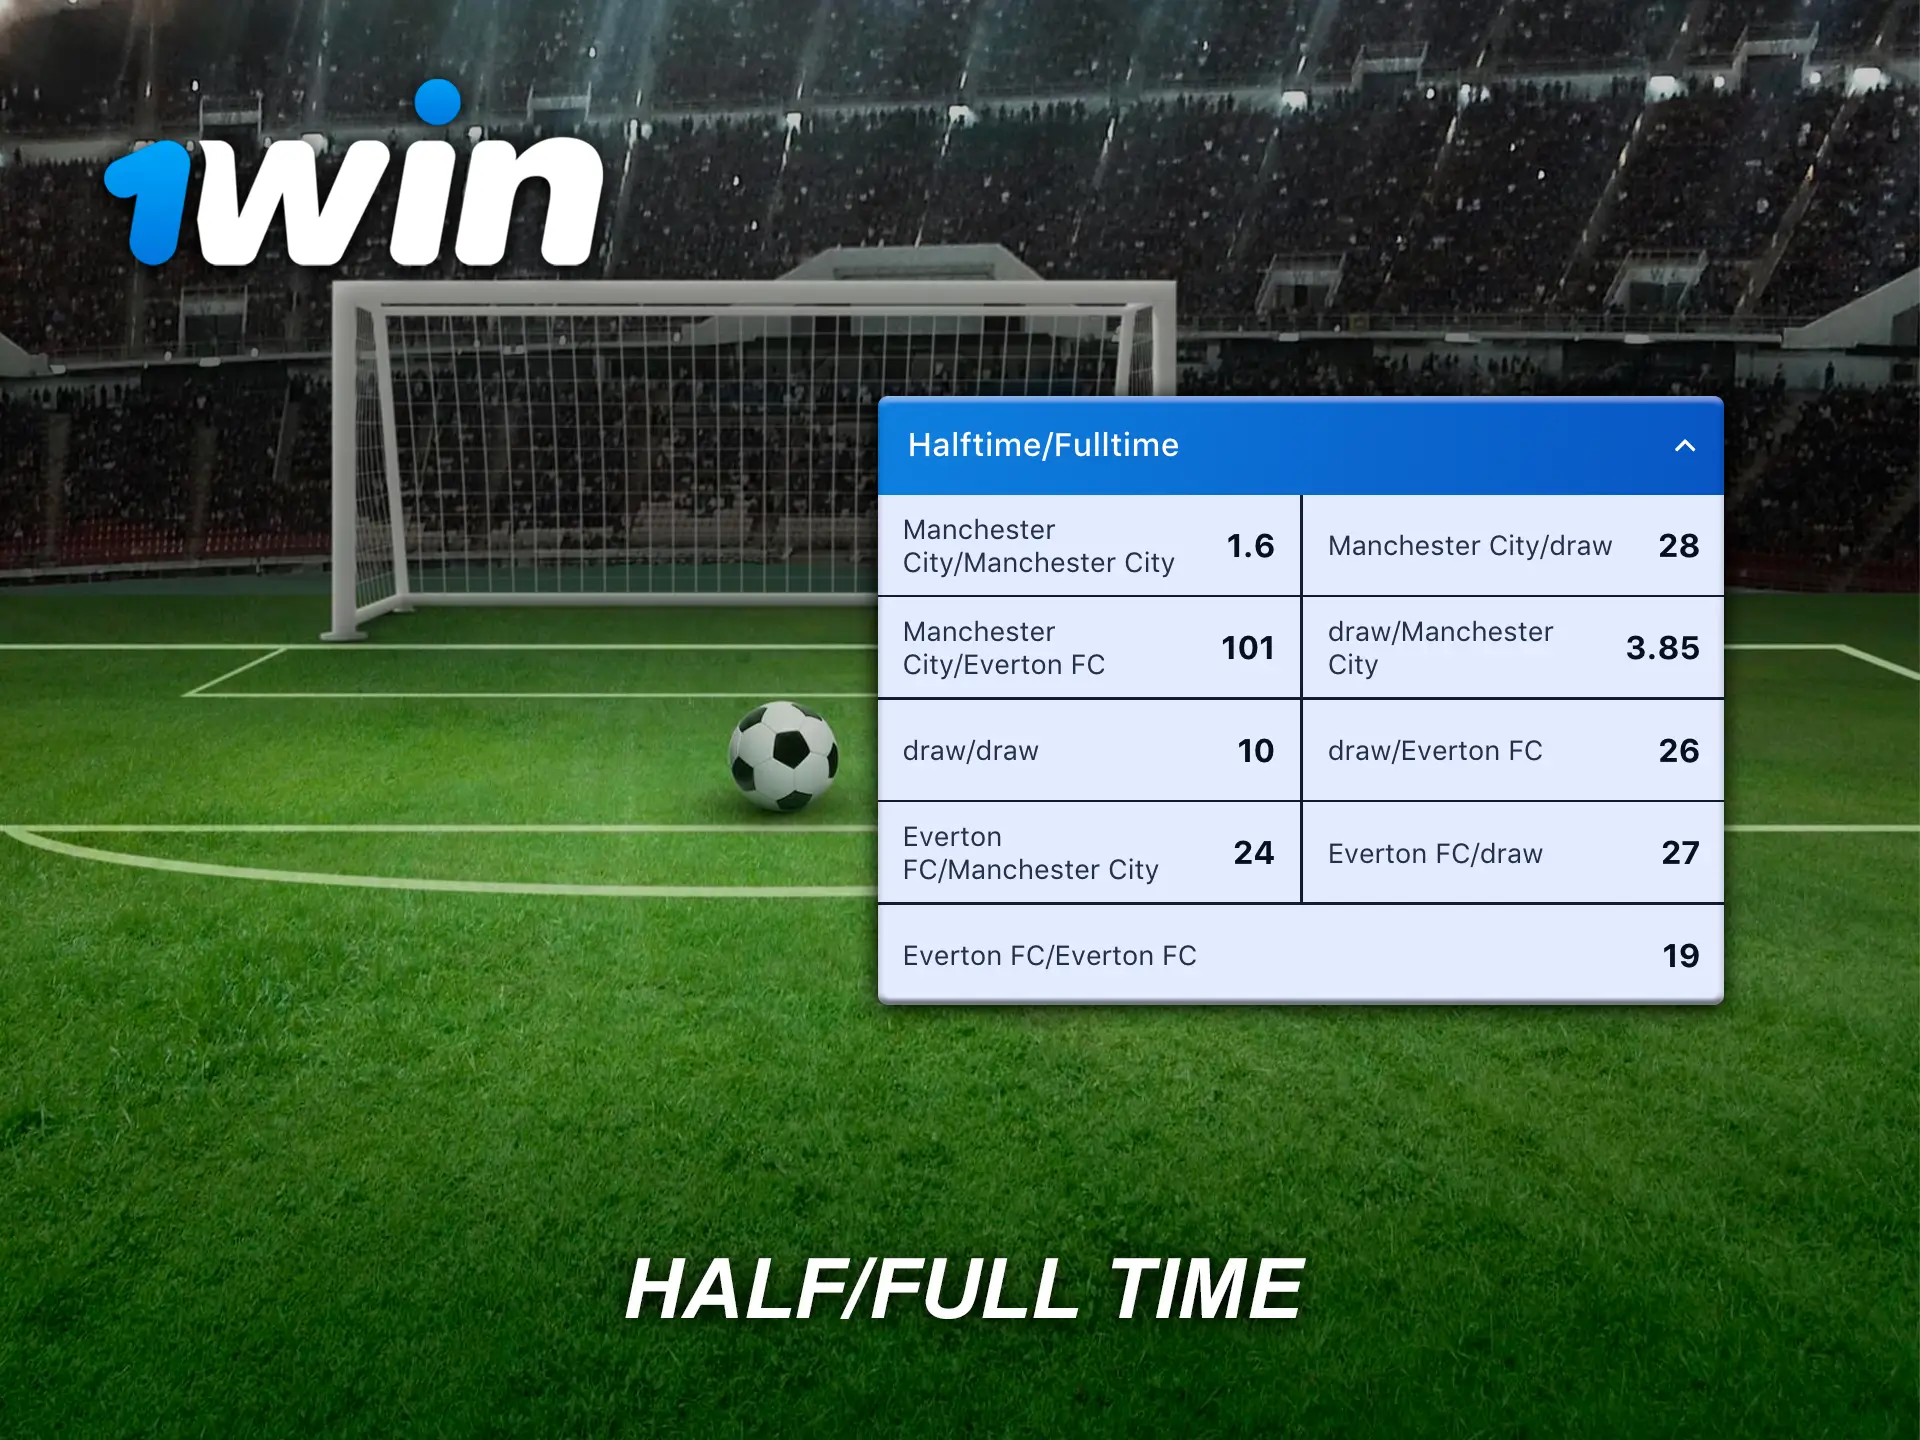 Bet on the outcome of a half or a whole match at 1Win.